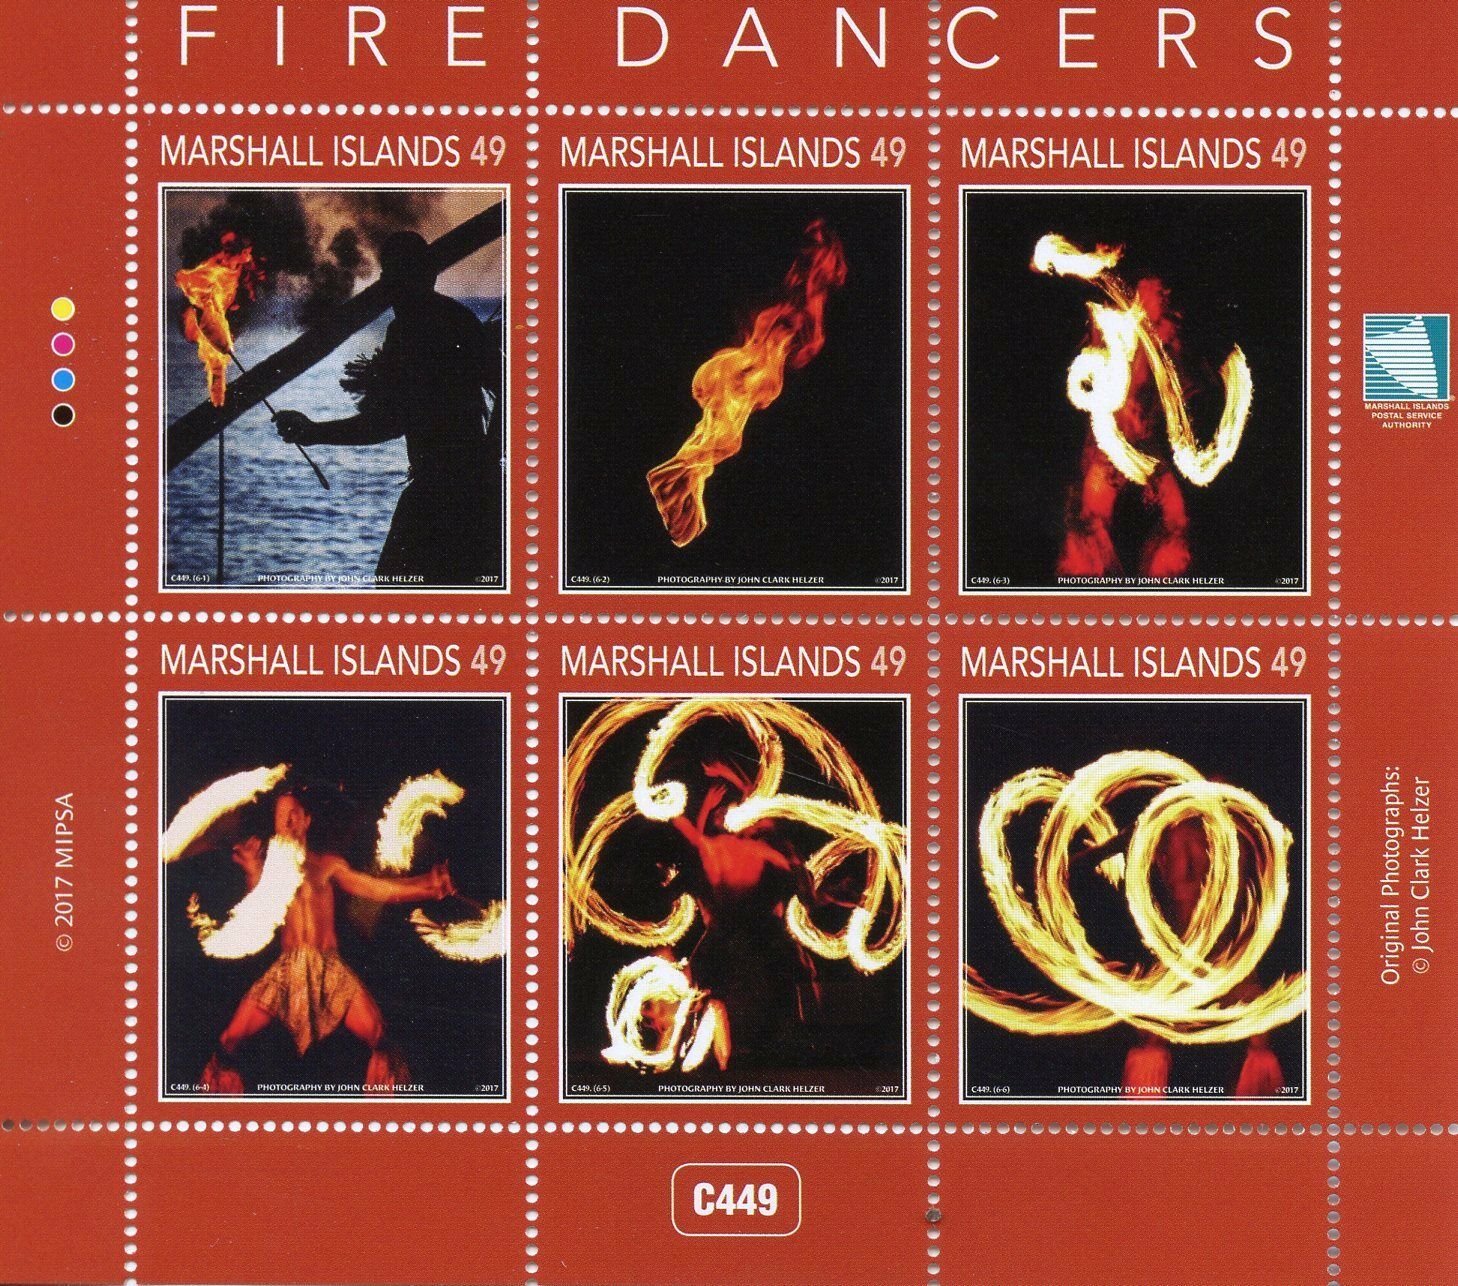 Marshall Islands 2017 MNH Fire Dancers 6v M/S Cultures Traditions Stamps